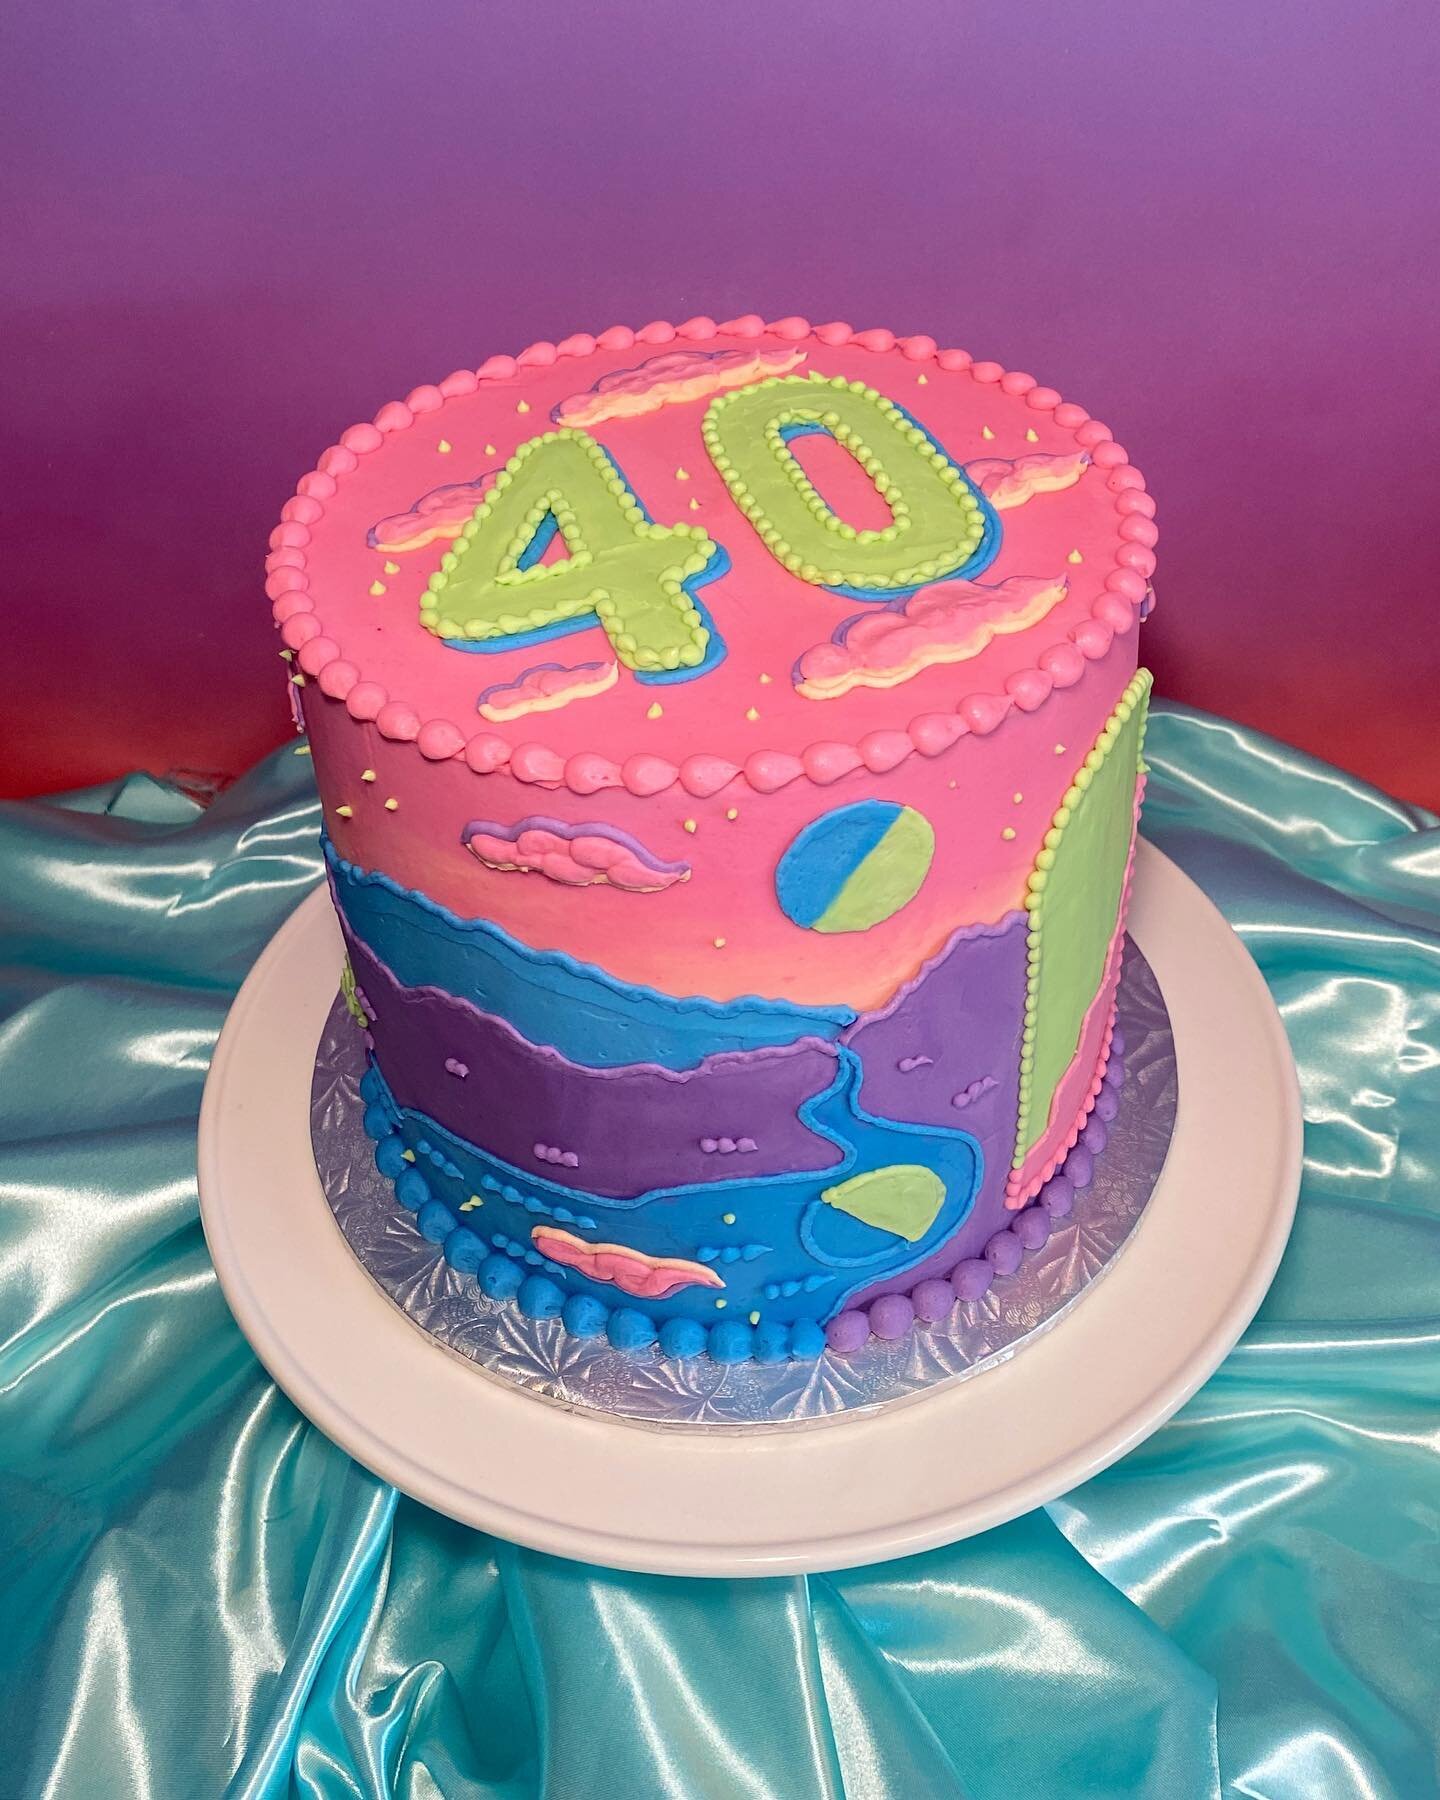 I turned 40! 
What a fun and sweaty weekend 🥰
Here&rsquo;s my cake:
Coconut cake with passion fruit filling and buttercream decoration. 
The possibilities of how to decorate my own barfday cake were nearly limitless&mdash;we were headed for Golden G